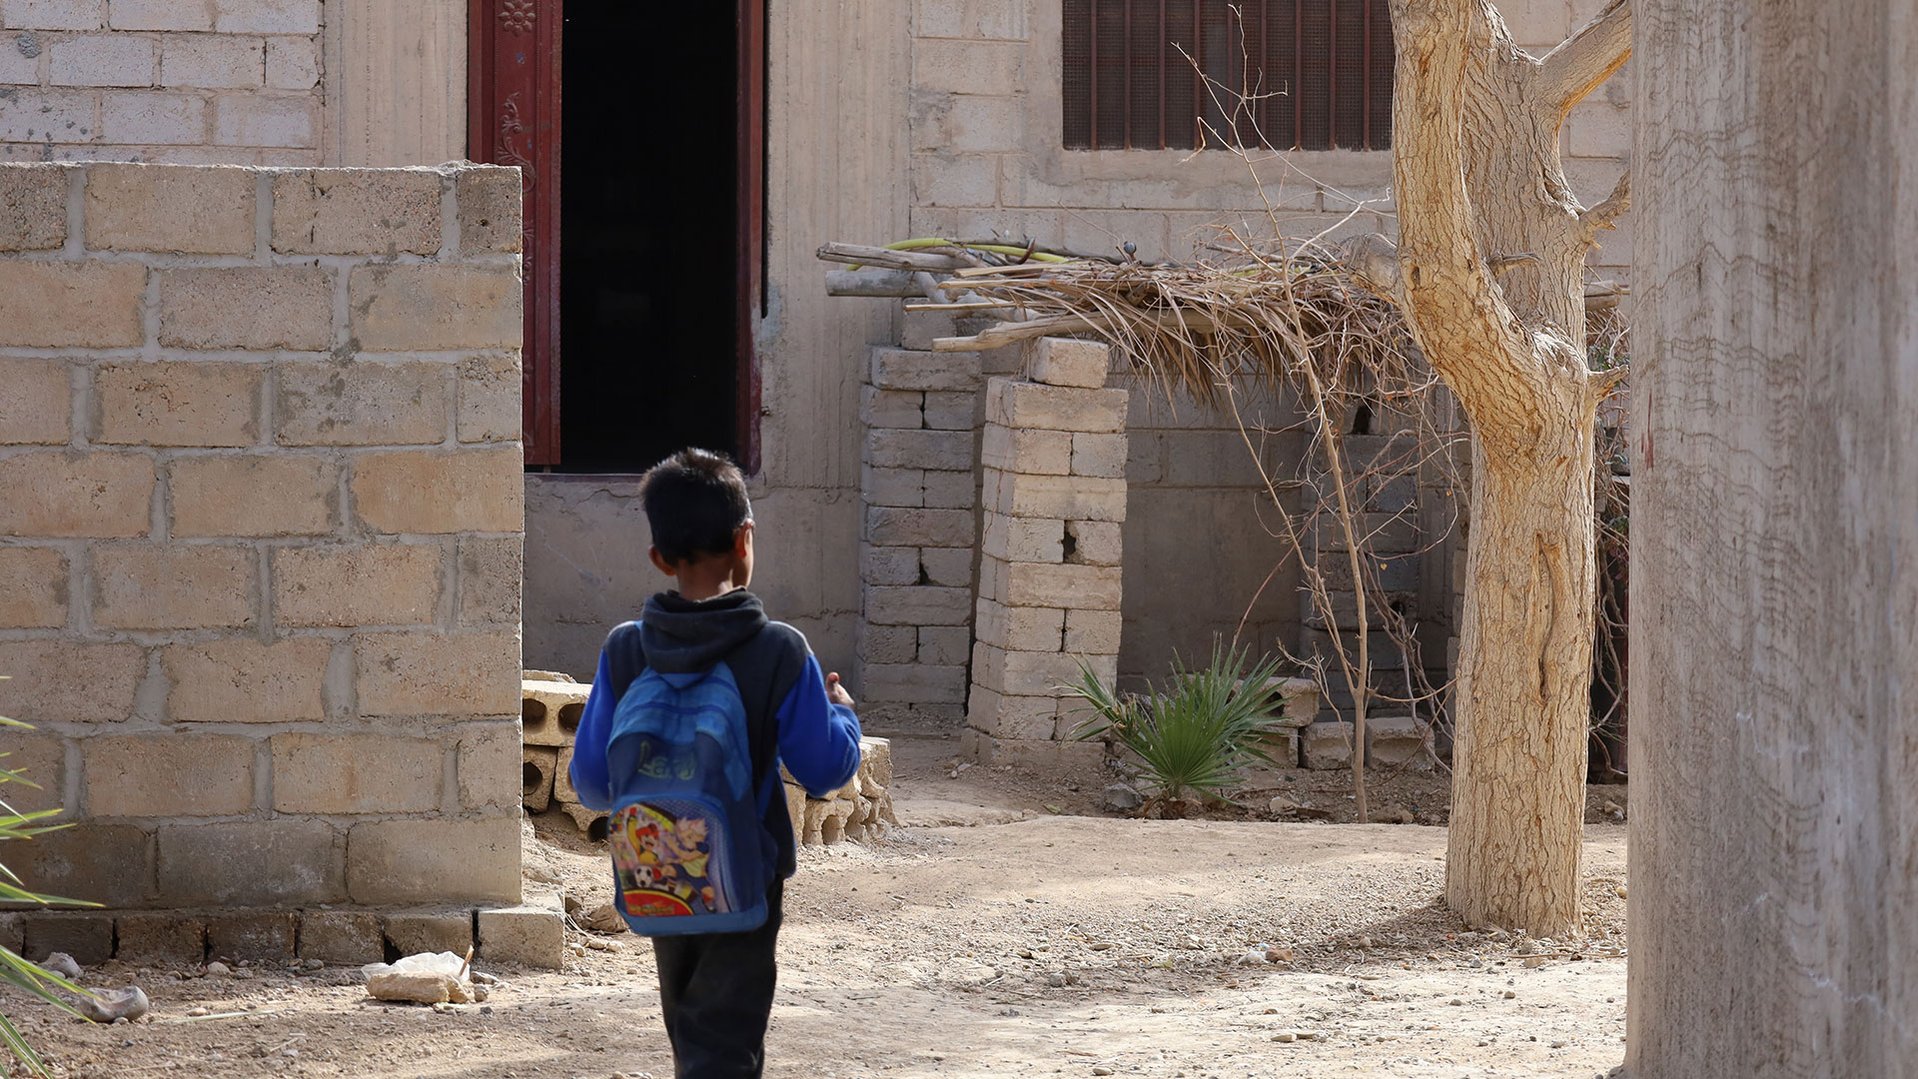 Nine-year-old Muhammed from Syria was forced to flee his home due to the violence in his home country